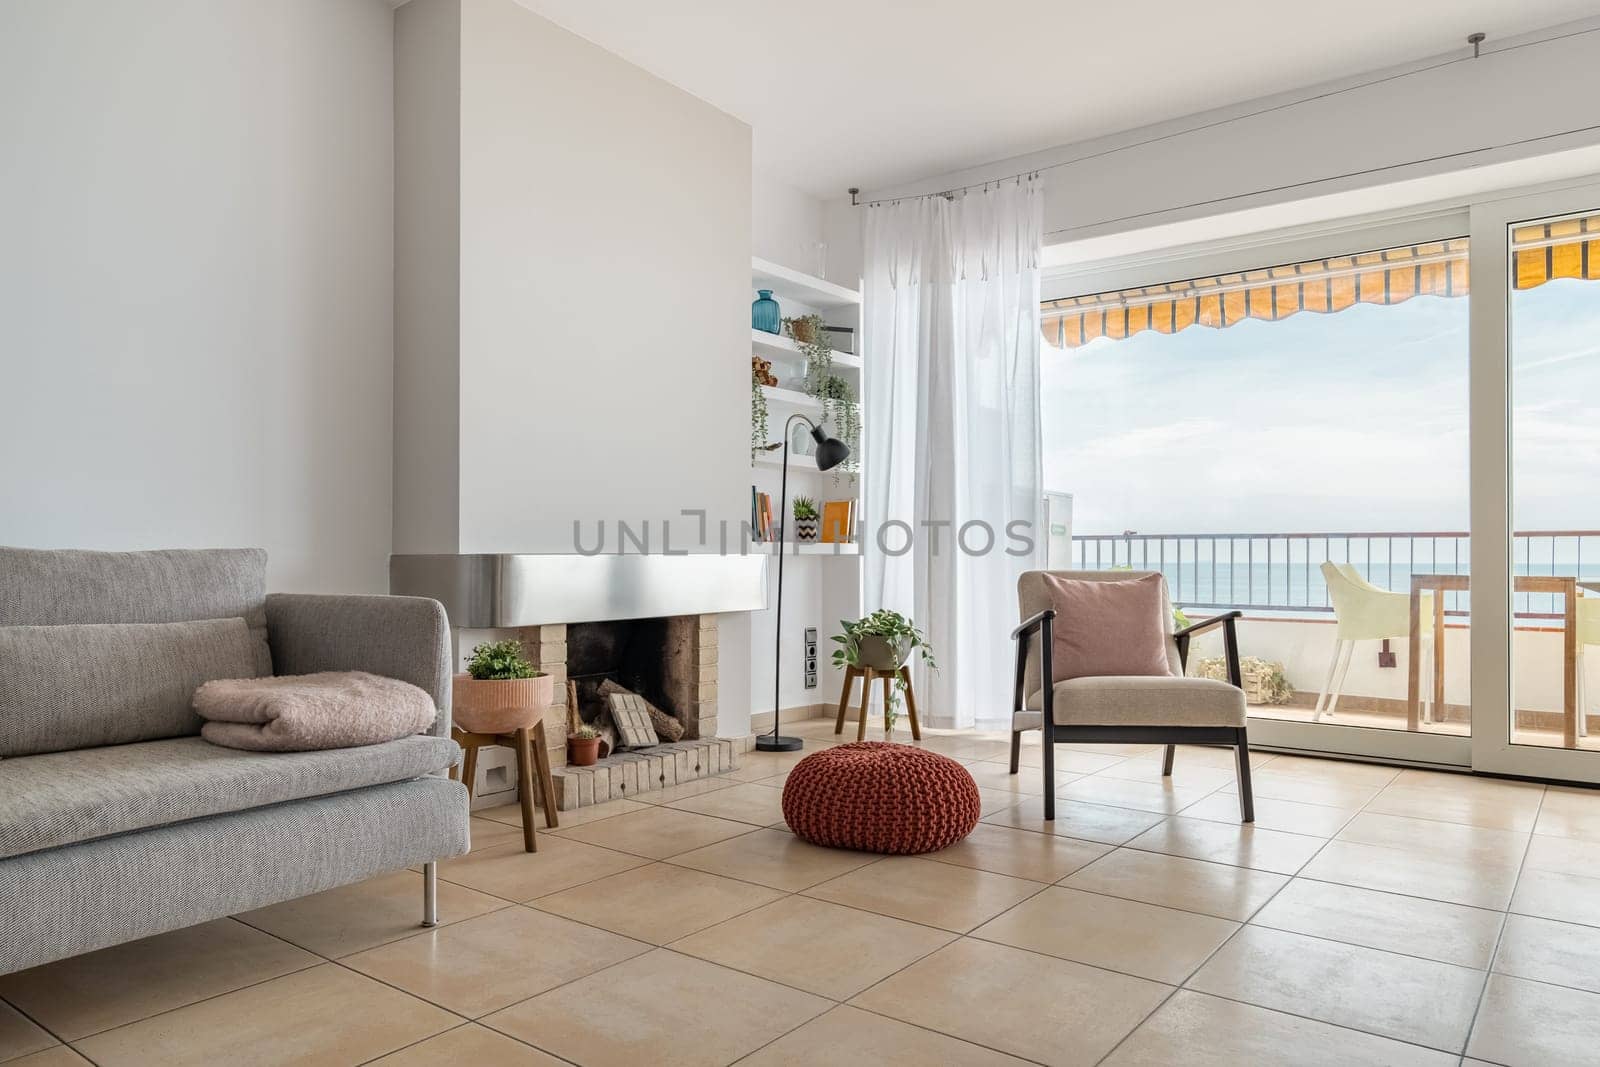 Fireplace creating coziness and comfort in studio apartment. Stylish residential house with large terrace by sea for tourist rent. Home comfort